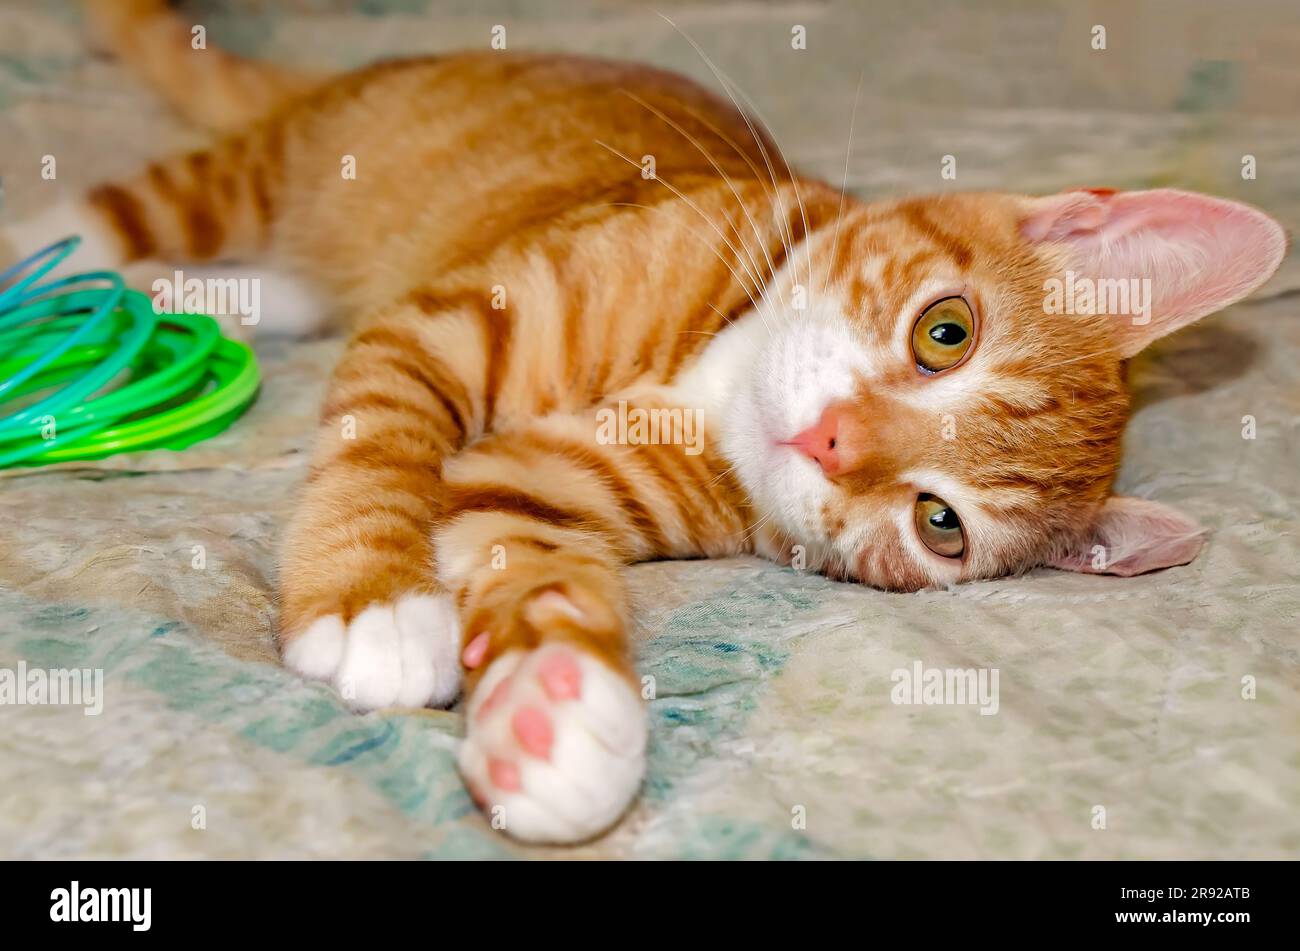 Wolfie, a 10-week-old orange and white kitten, plays with a plastic Slinky spring toy, June 7, 2023, in Coden, Alabama. Stock Photo